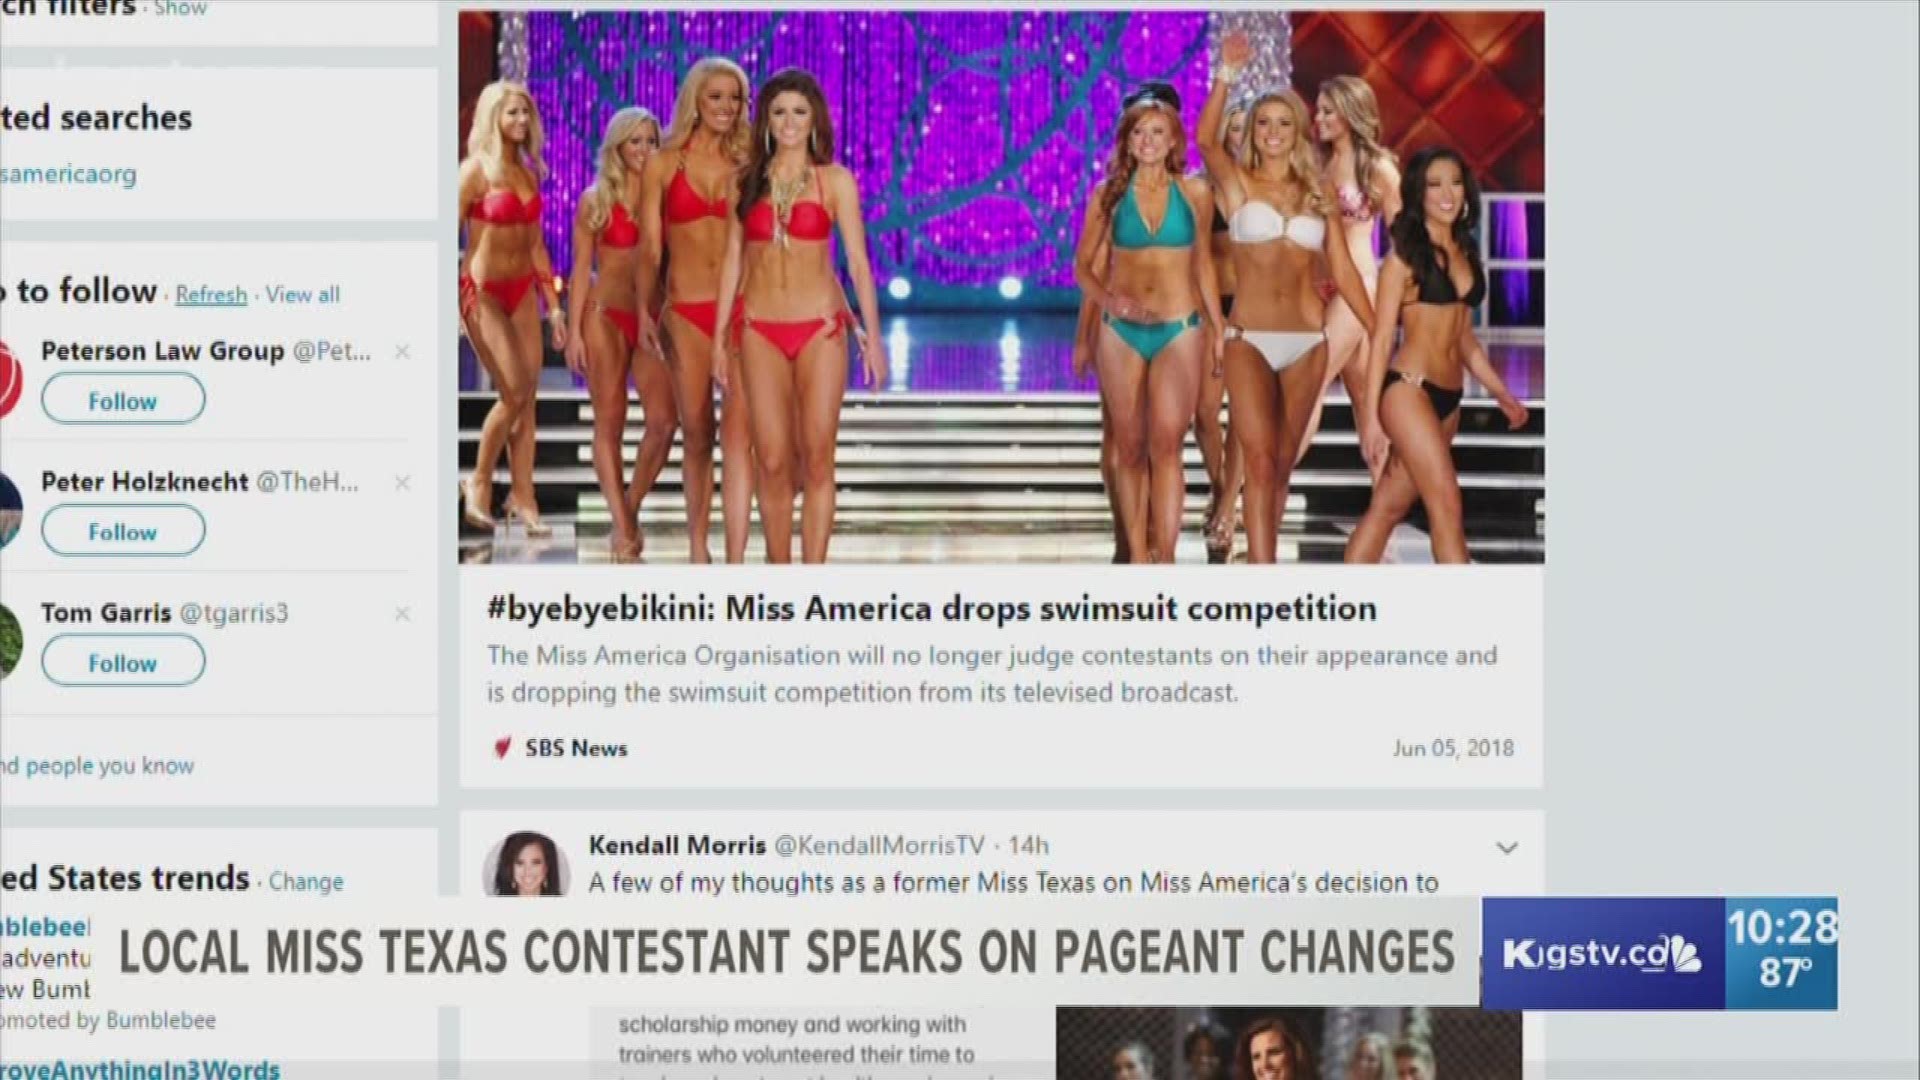 Changes are coming soon to the Miss America Pageant. Today the organization announced they would be doing away with the swimsuit portion of the competition and no longer judge contestants on their looks.